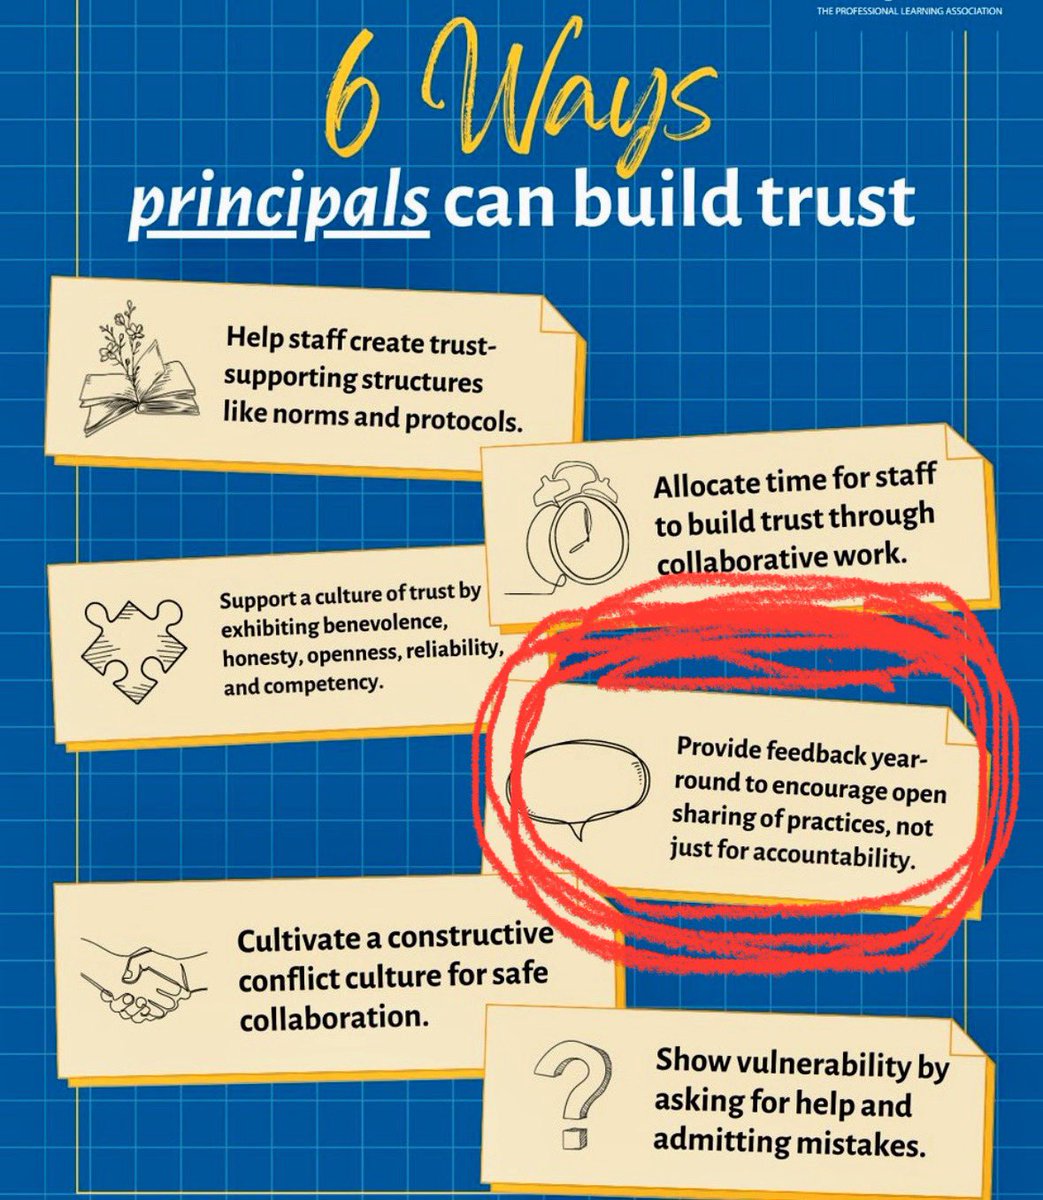 Be creative with feedback by providing informal notes, suggestions, etc creates a culture where this is valued. Look to support existing best practices and help create avenues for instructional betterment. Overlooking is ed. malpractice @SpotsySchools @LearningForward @VDOE_News